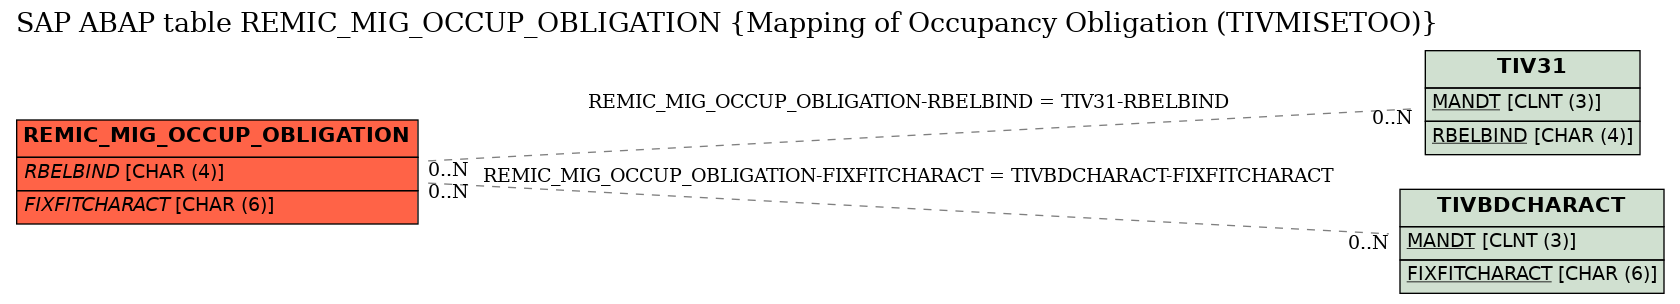 E-R Diagram for table REMIC_MIG_OCCUP_OBLIGATION (Mapping of Occupancy Obligation (TIVMISETOO))